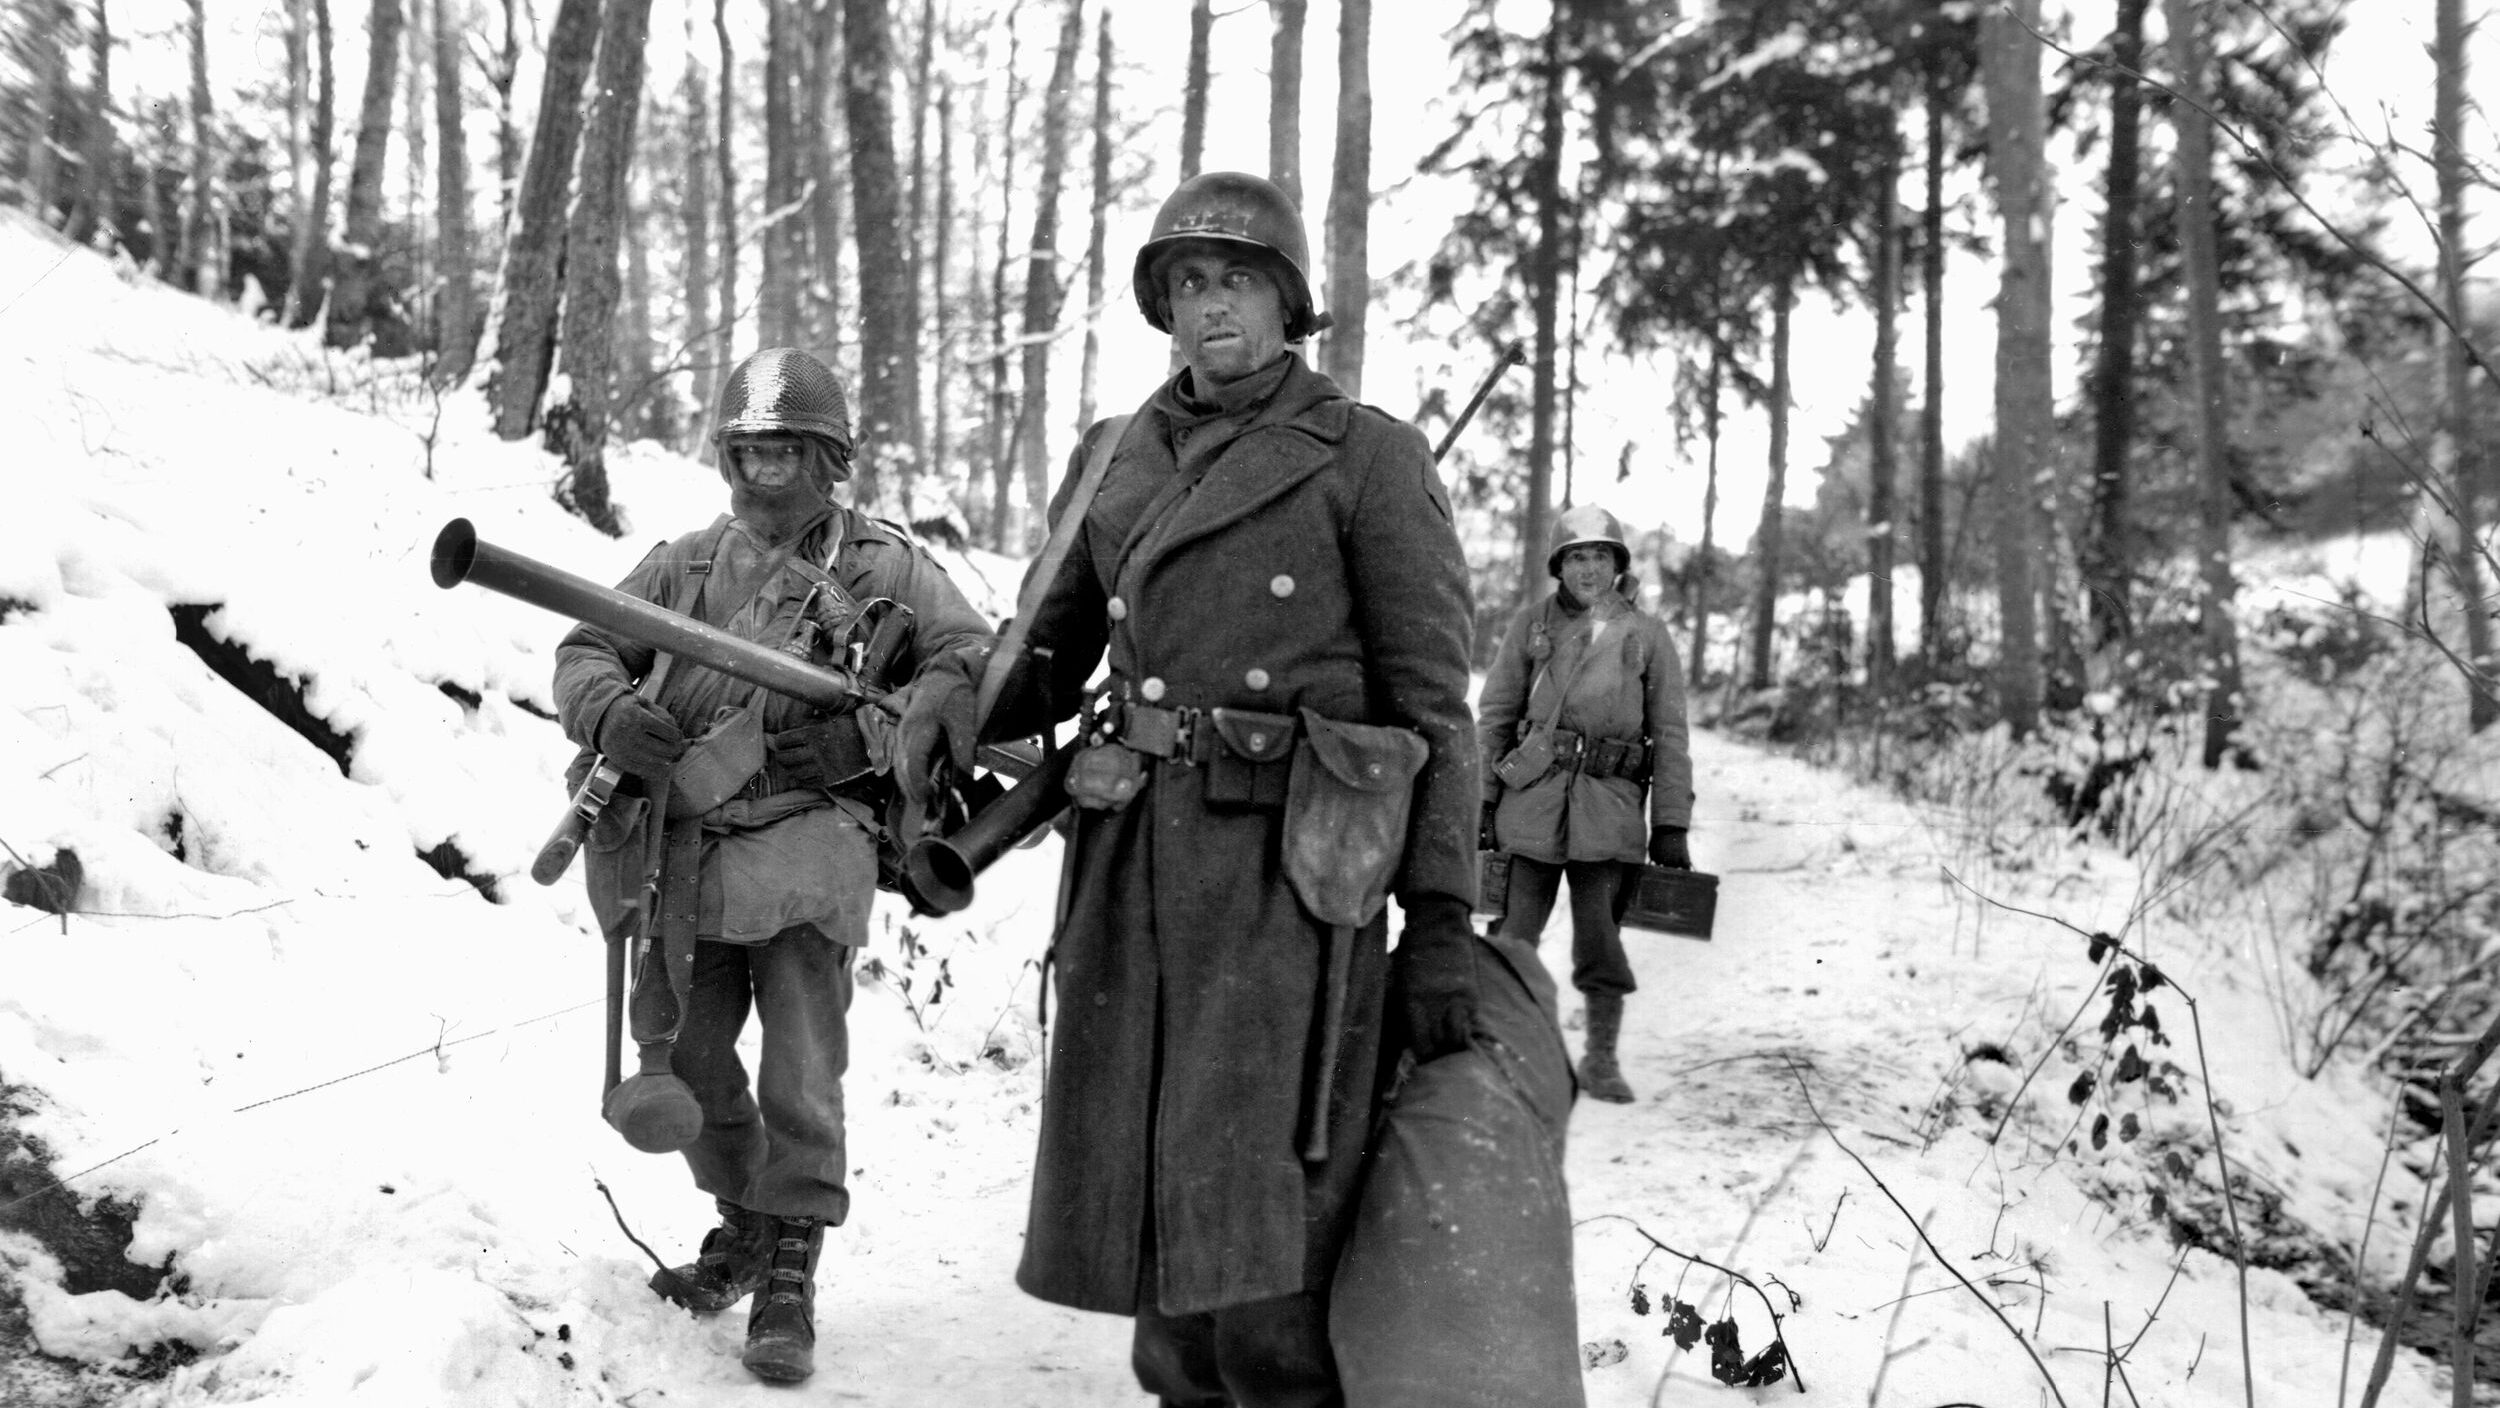 Soldiers of the 291st Engineer Combat Battalion trudge through snow while carrying bazookas. According to their commanding officer, Lt. Col. David E. Pergrin, the brave engineers stayed to defend Trois-Ponts during the Battle of the Bulge after they had been taunted by fellow soldiers. Pergrin recalled that the infantrymen had shouted, “You engineer so-and-so! Why don't you come on up there and fight?”